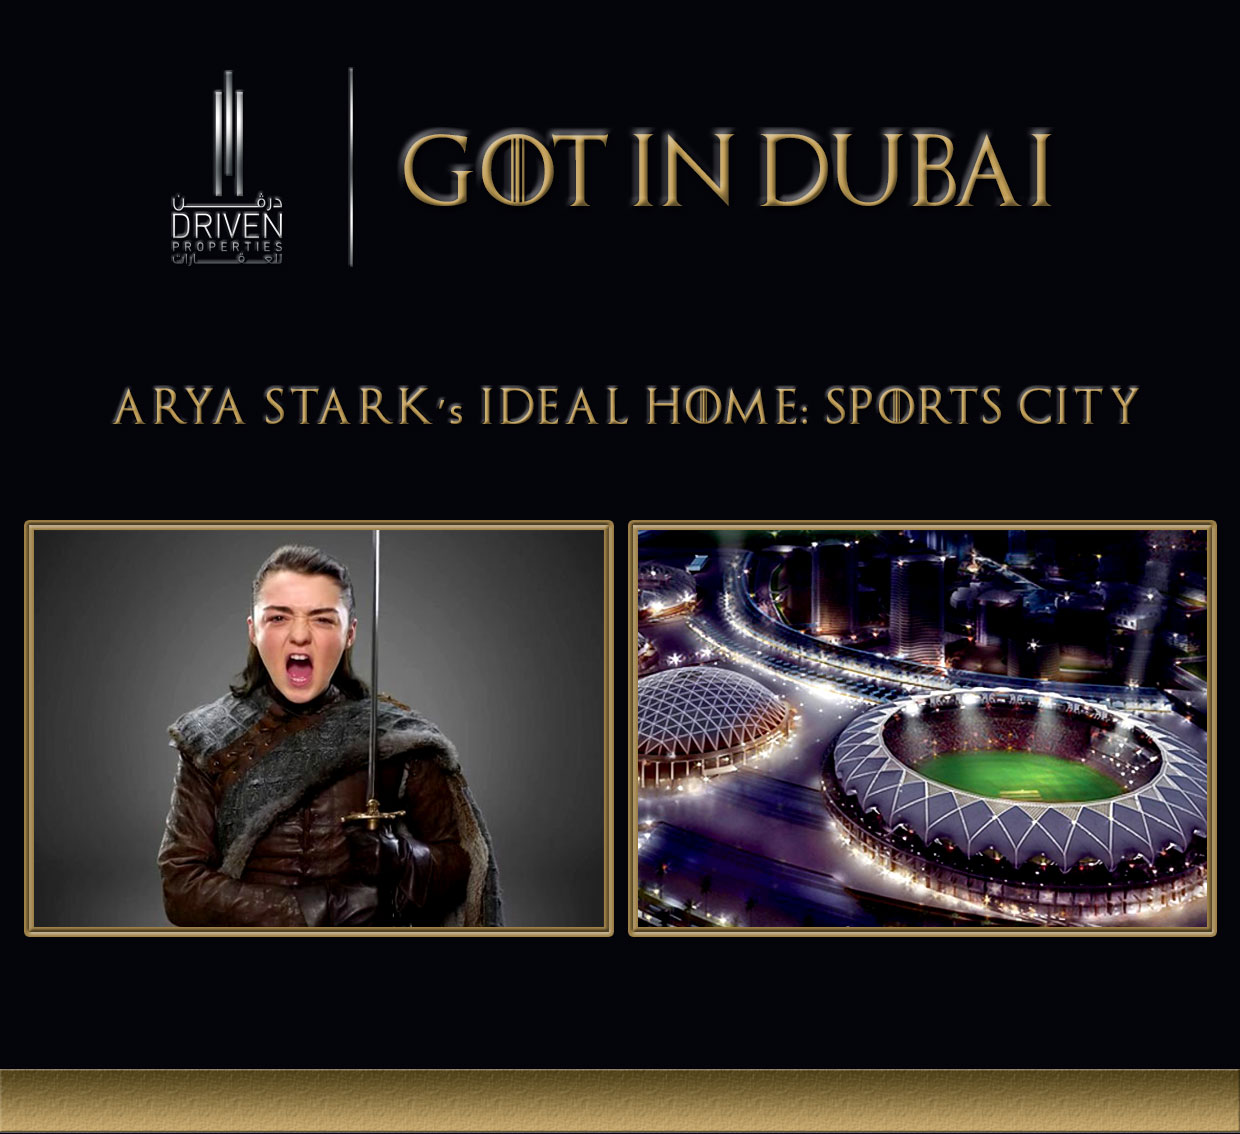 If Characters From Game of Thrones Lived in Dubai